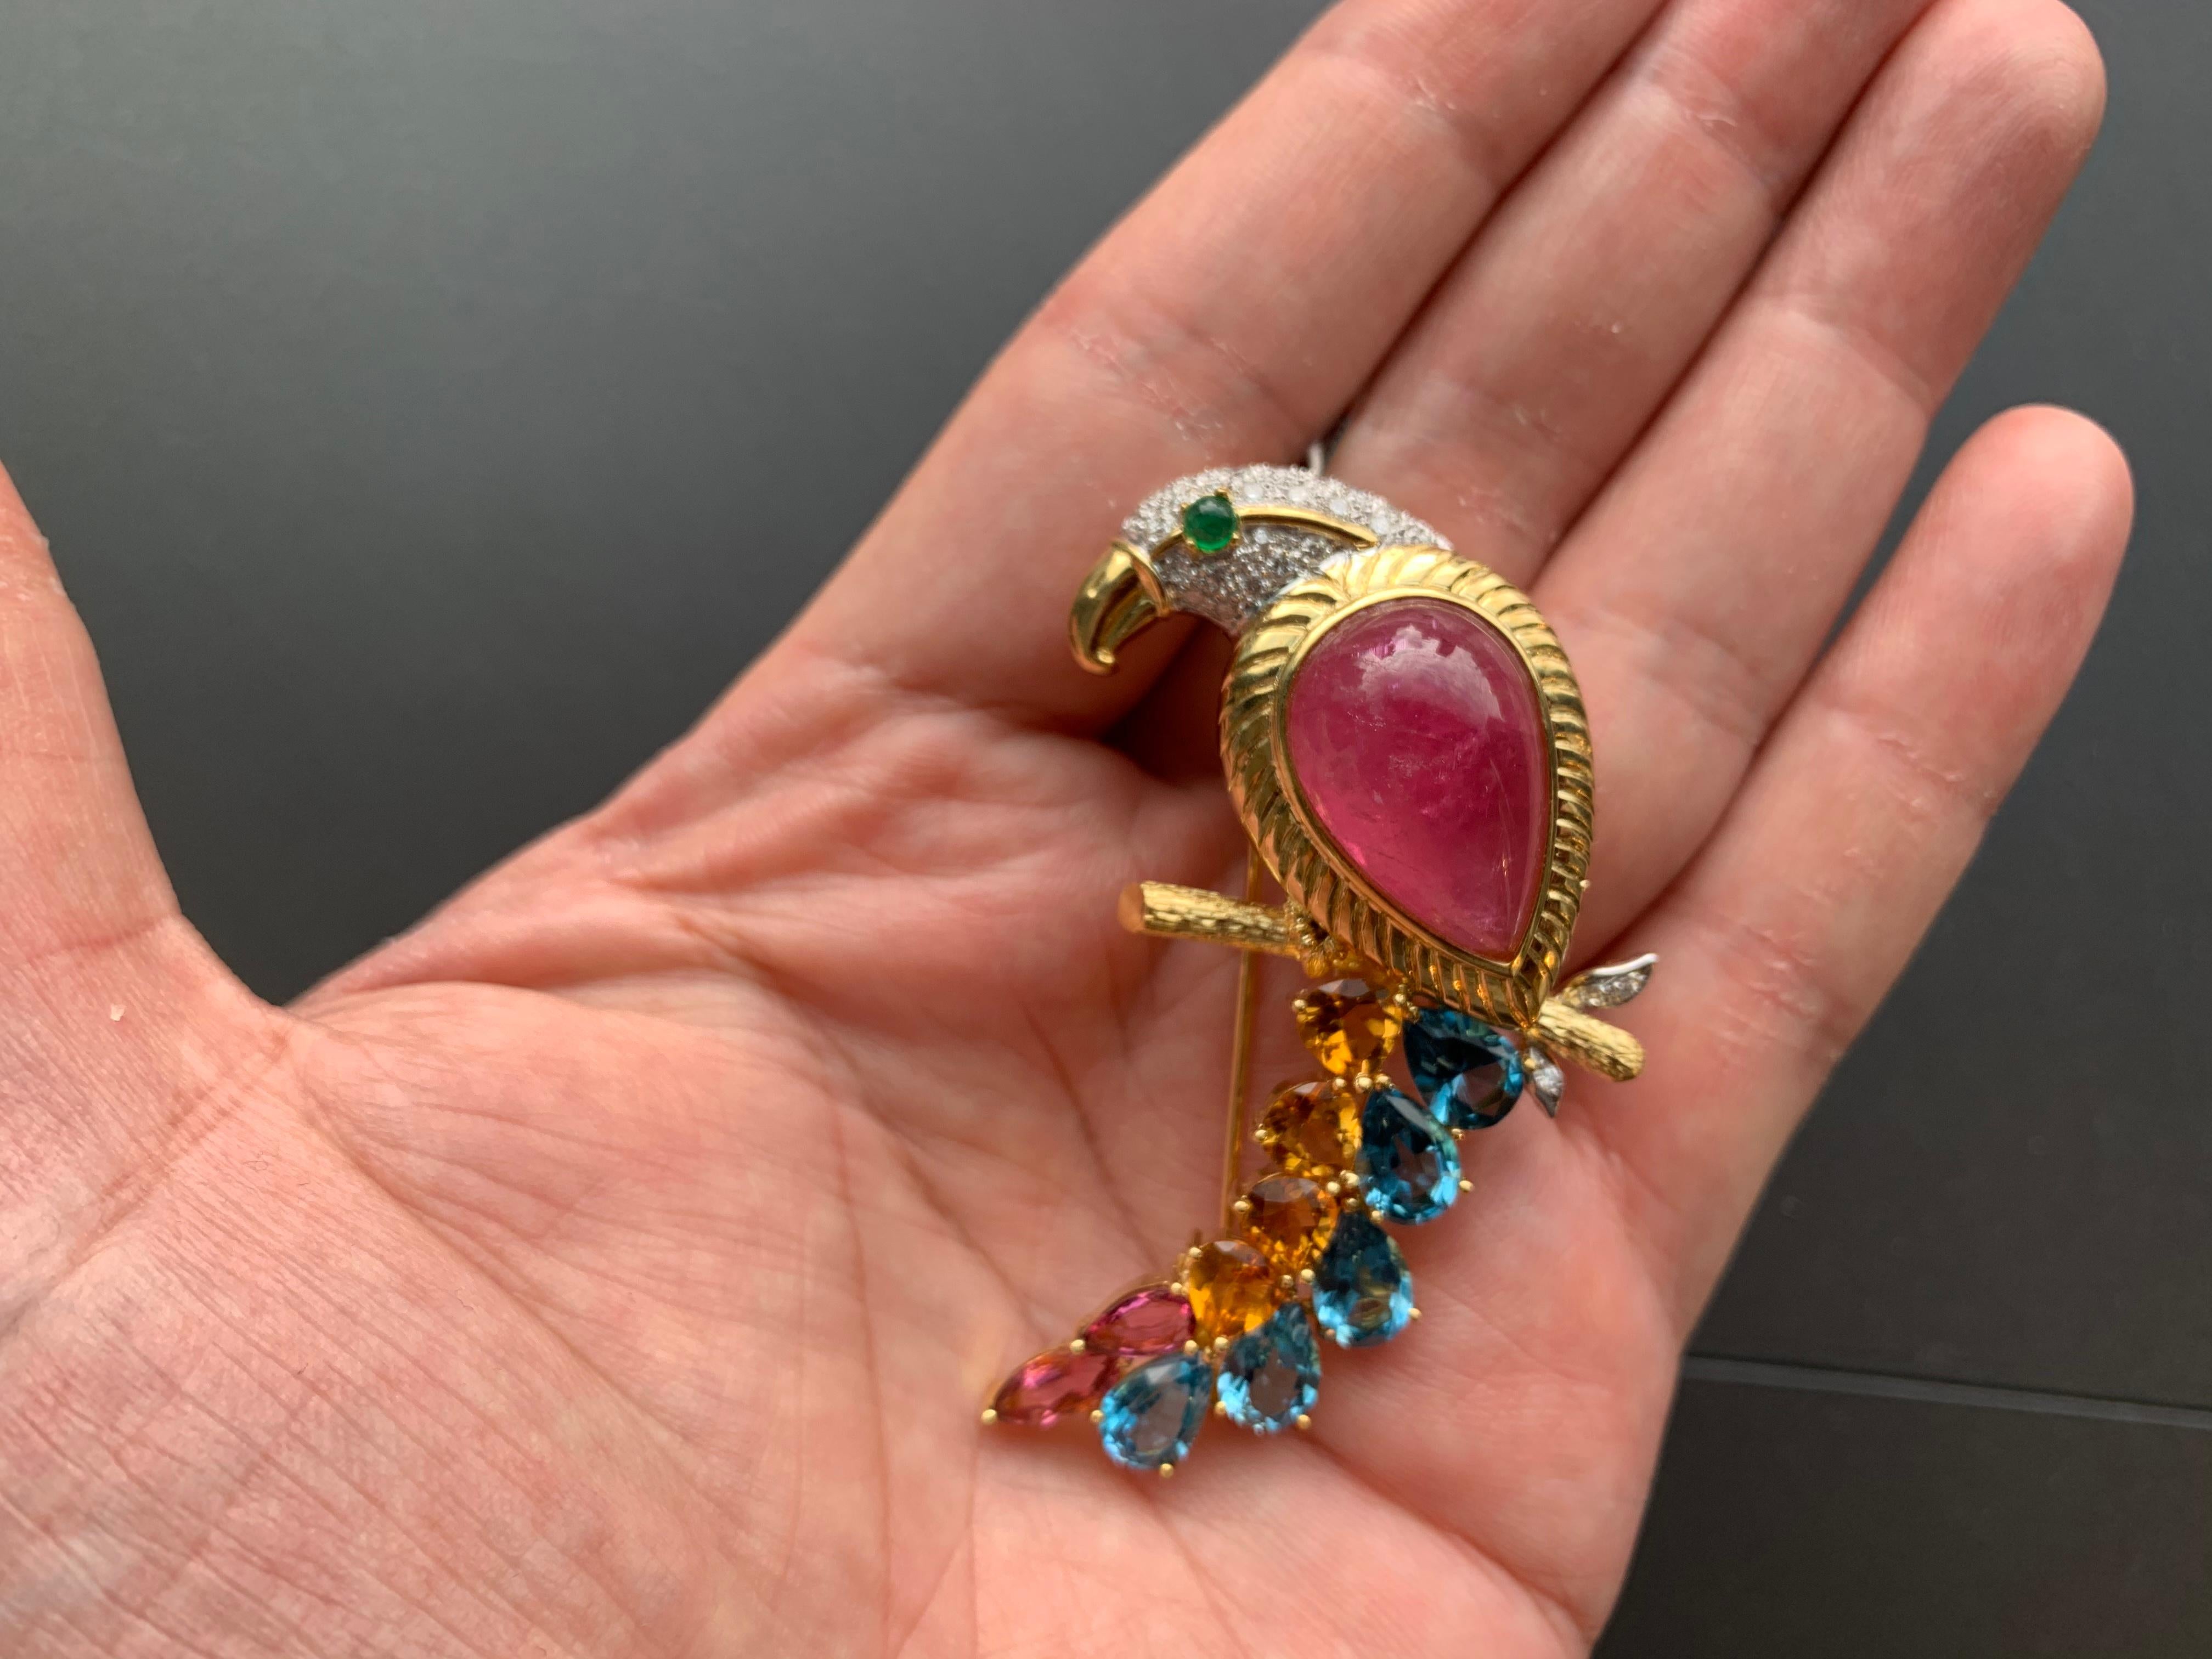 Multi Gem Bird of Paradise Brooch

Cabochon Pink Tourmaline approx 15.3 ct
Further set with diamonds, citrines, topaz, and two faceted pink tourmaline
18 karat gold
circa 1980